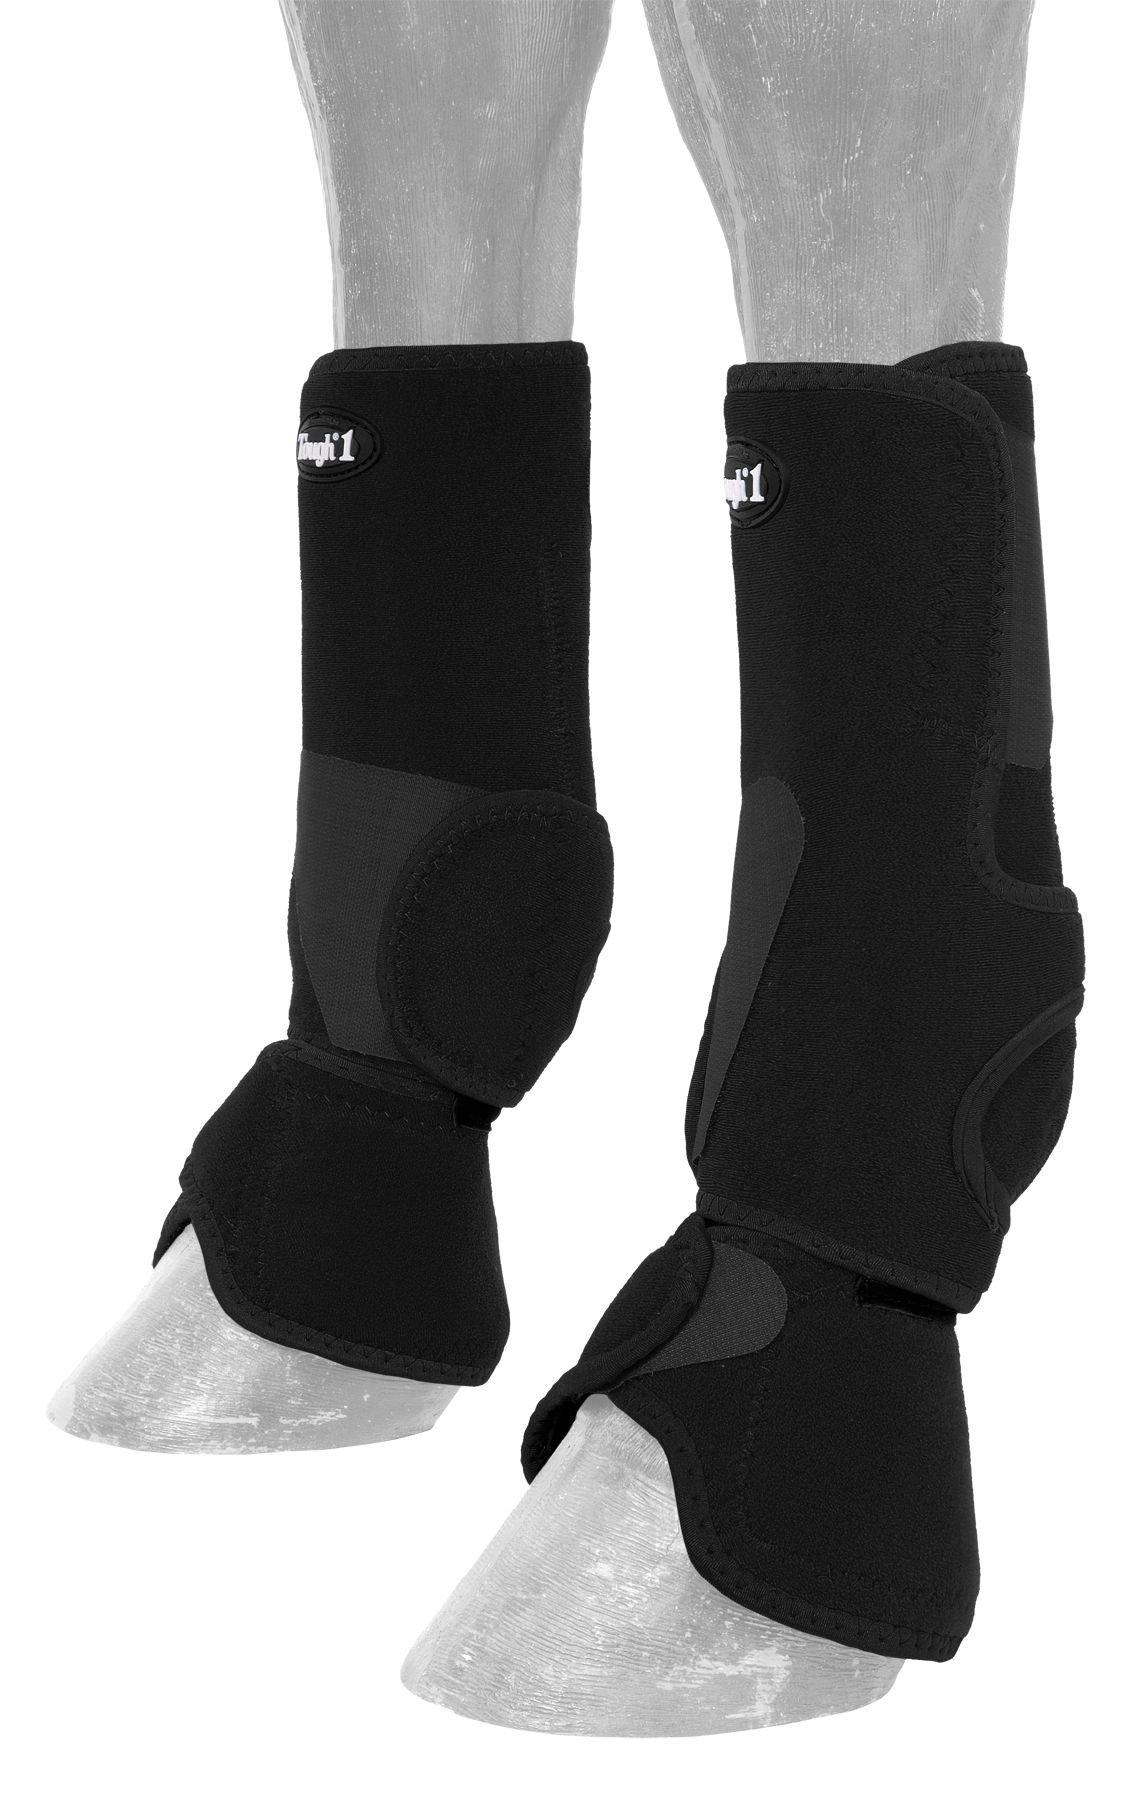 Tough 1 Performers 1st Choice Combo Boots, Black, Large